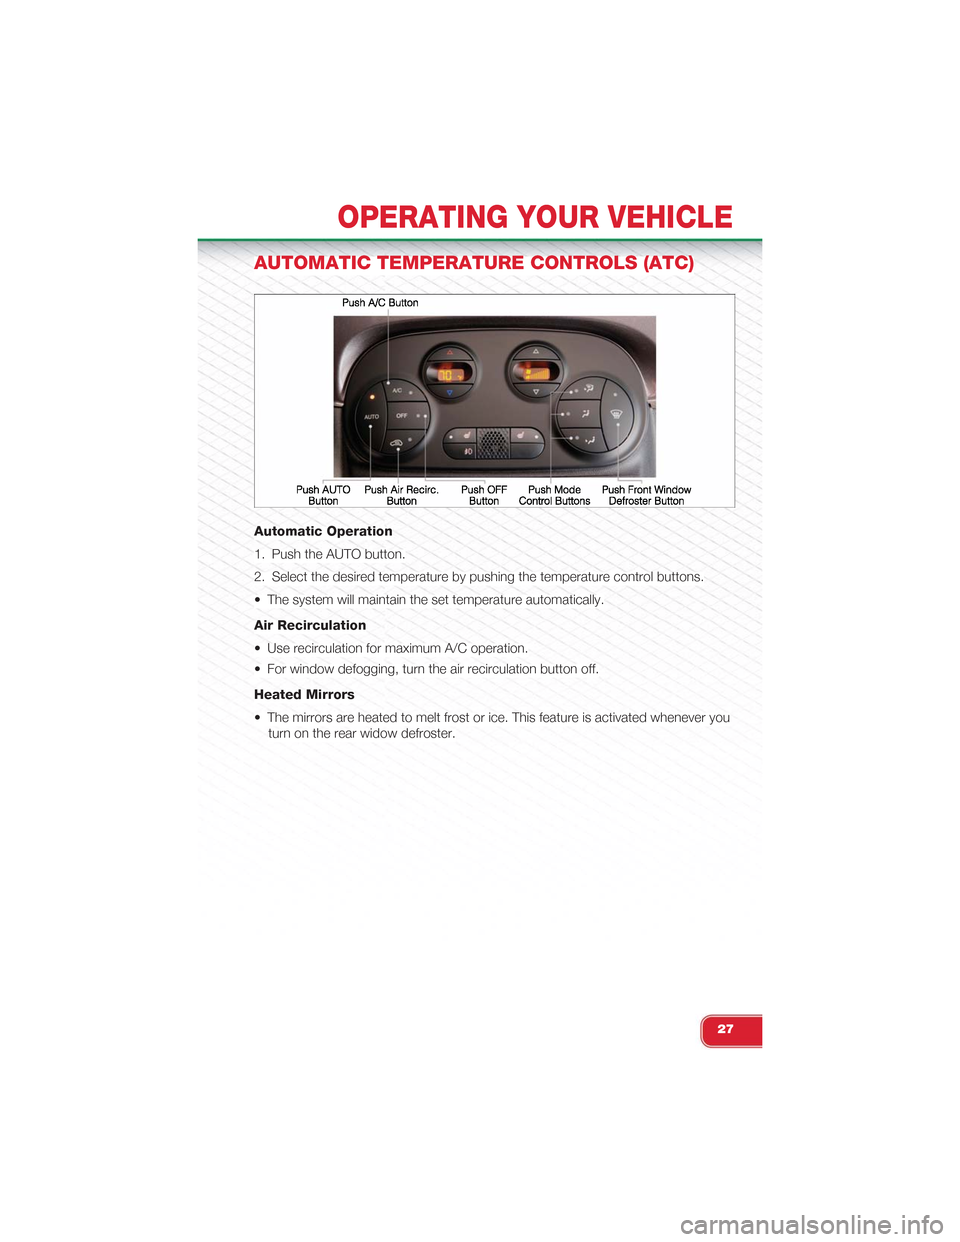 FIAT 500 ABARTH 2014 2.G Owners Manual AUTOMATIC TEMPERATURE CONTROLS (ATC)
Automatic Operation
1. Push the AUTO button.
2. Select the desired temperature by pushing the temperature control buttons.
• The system will maintain the set tem